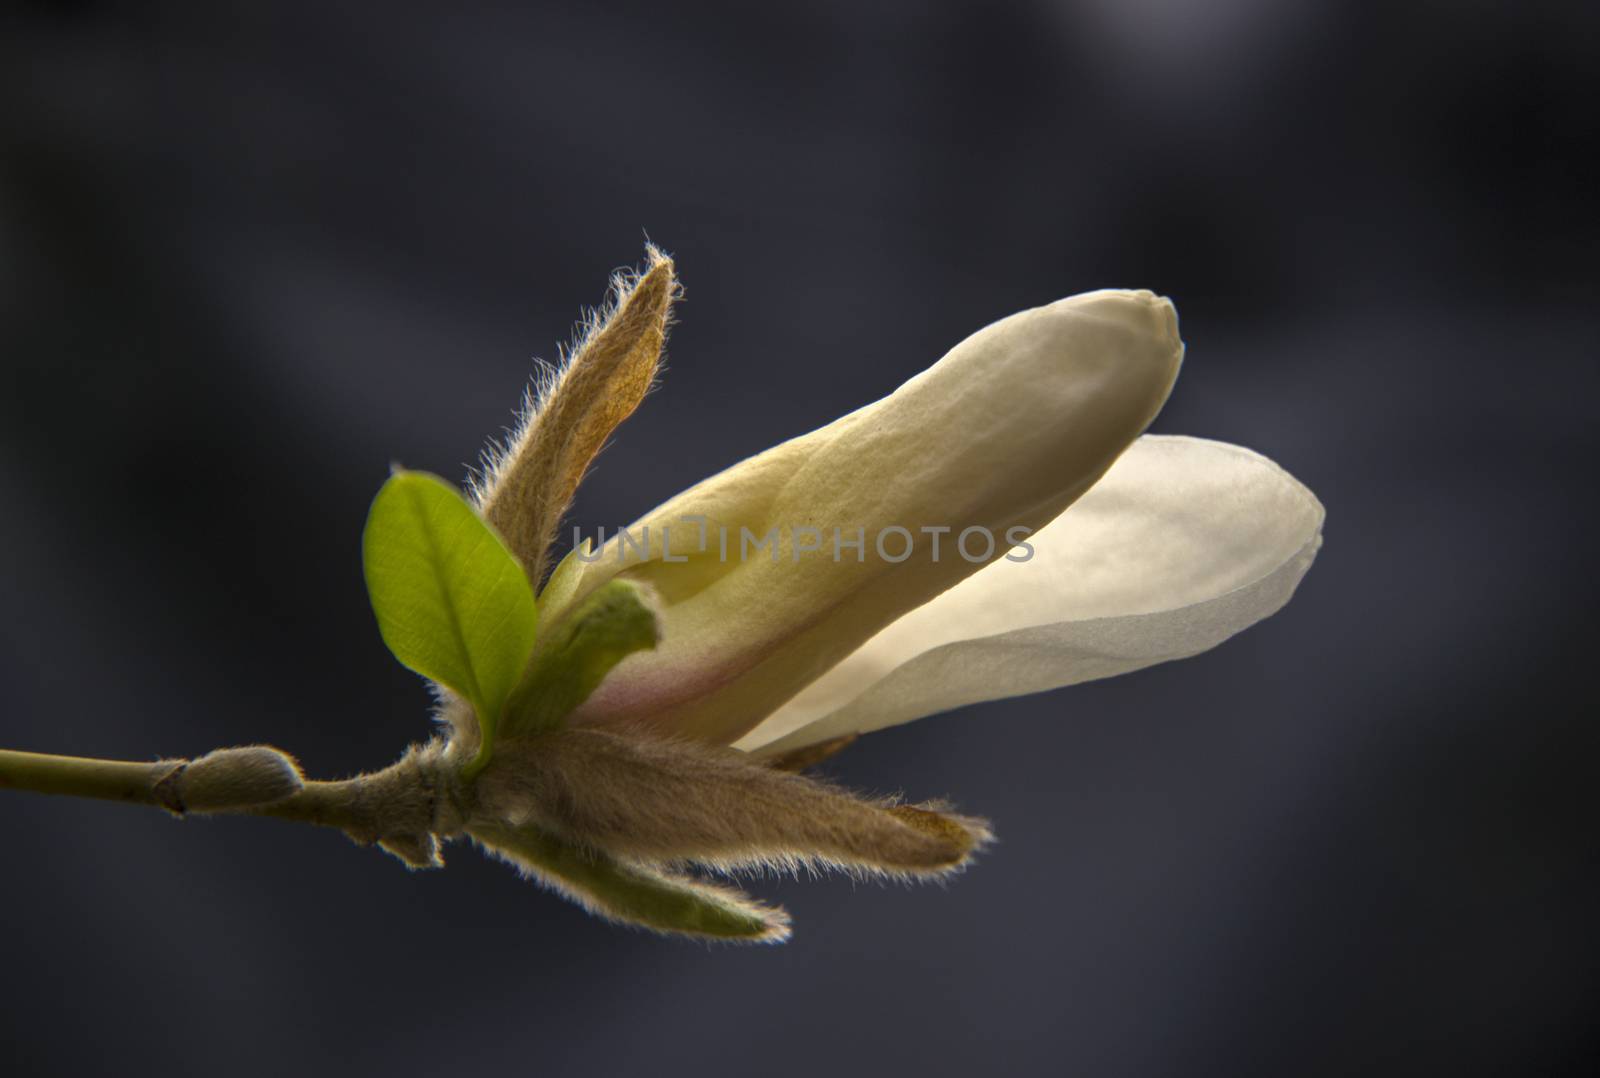 Bud of a yellow magnolia on a tree branch by Irene1601